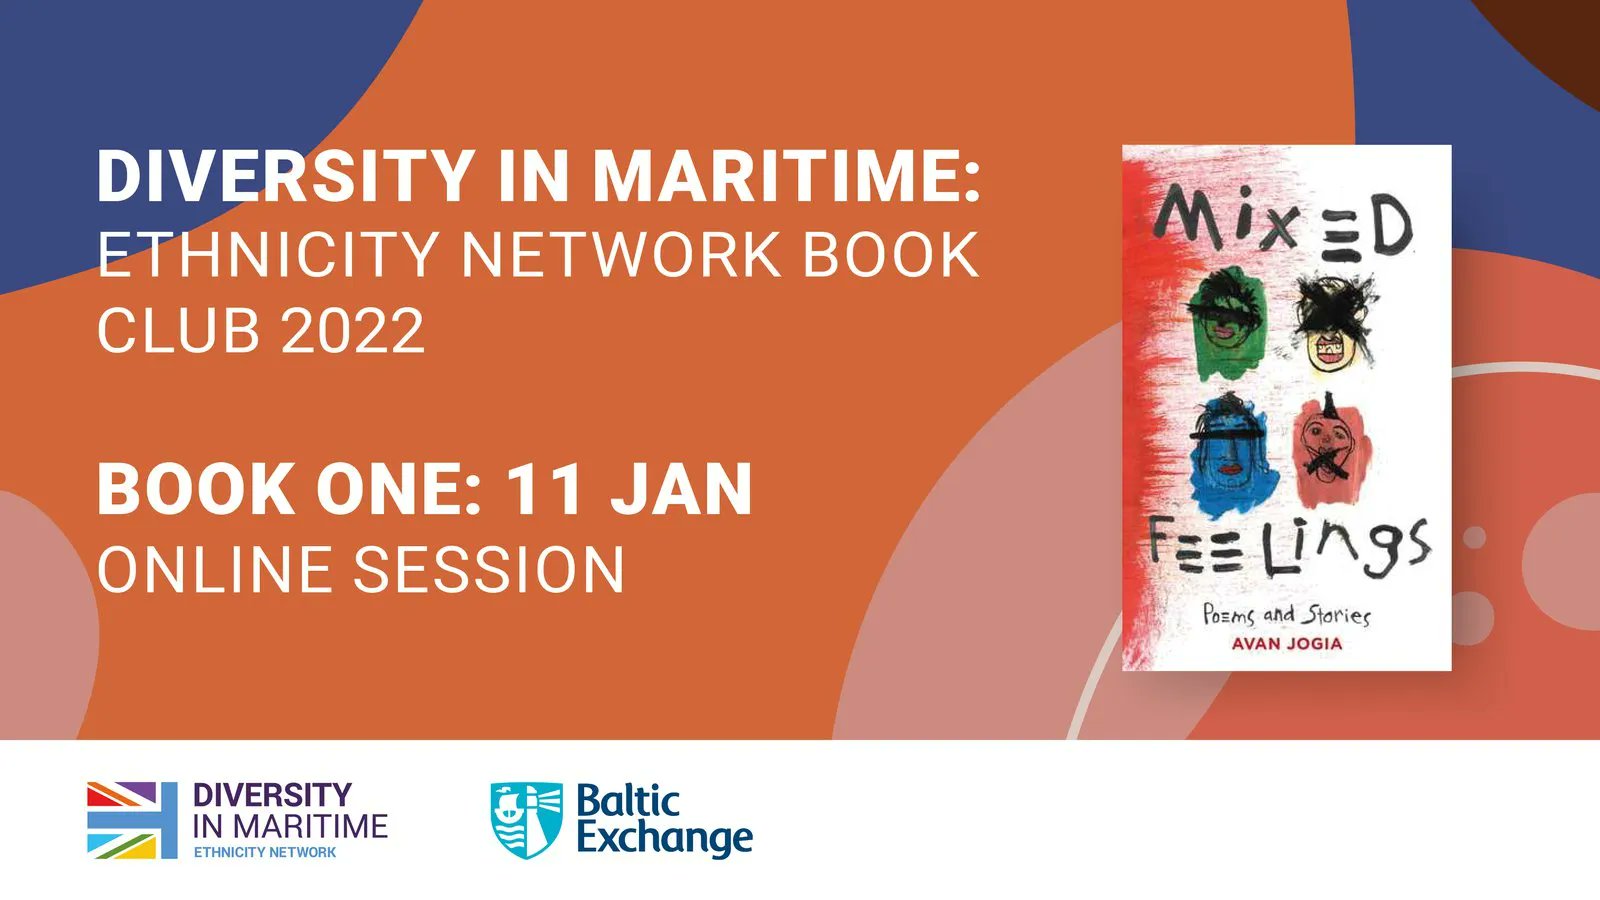 Maritime UK on Twitter: "Our first #MaritimeUK Book Club Session of 2022 takes place next week! will be discussing Mixed Feelings: Poems and Avan Jogia. In spirit of